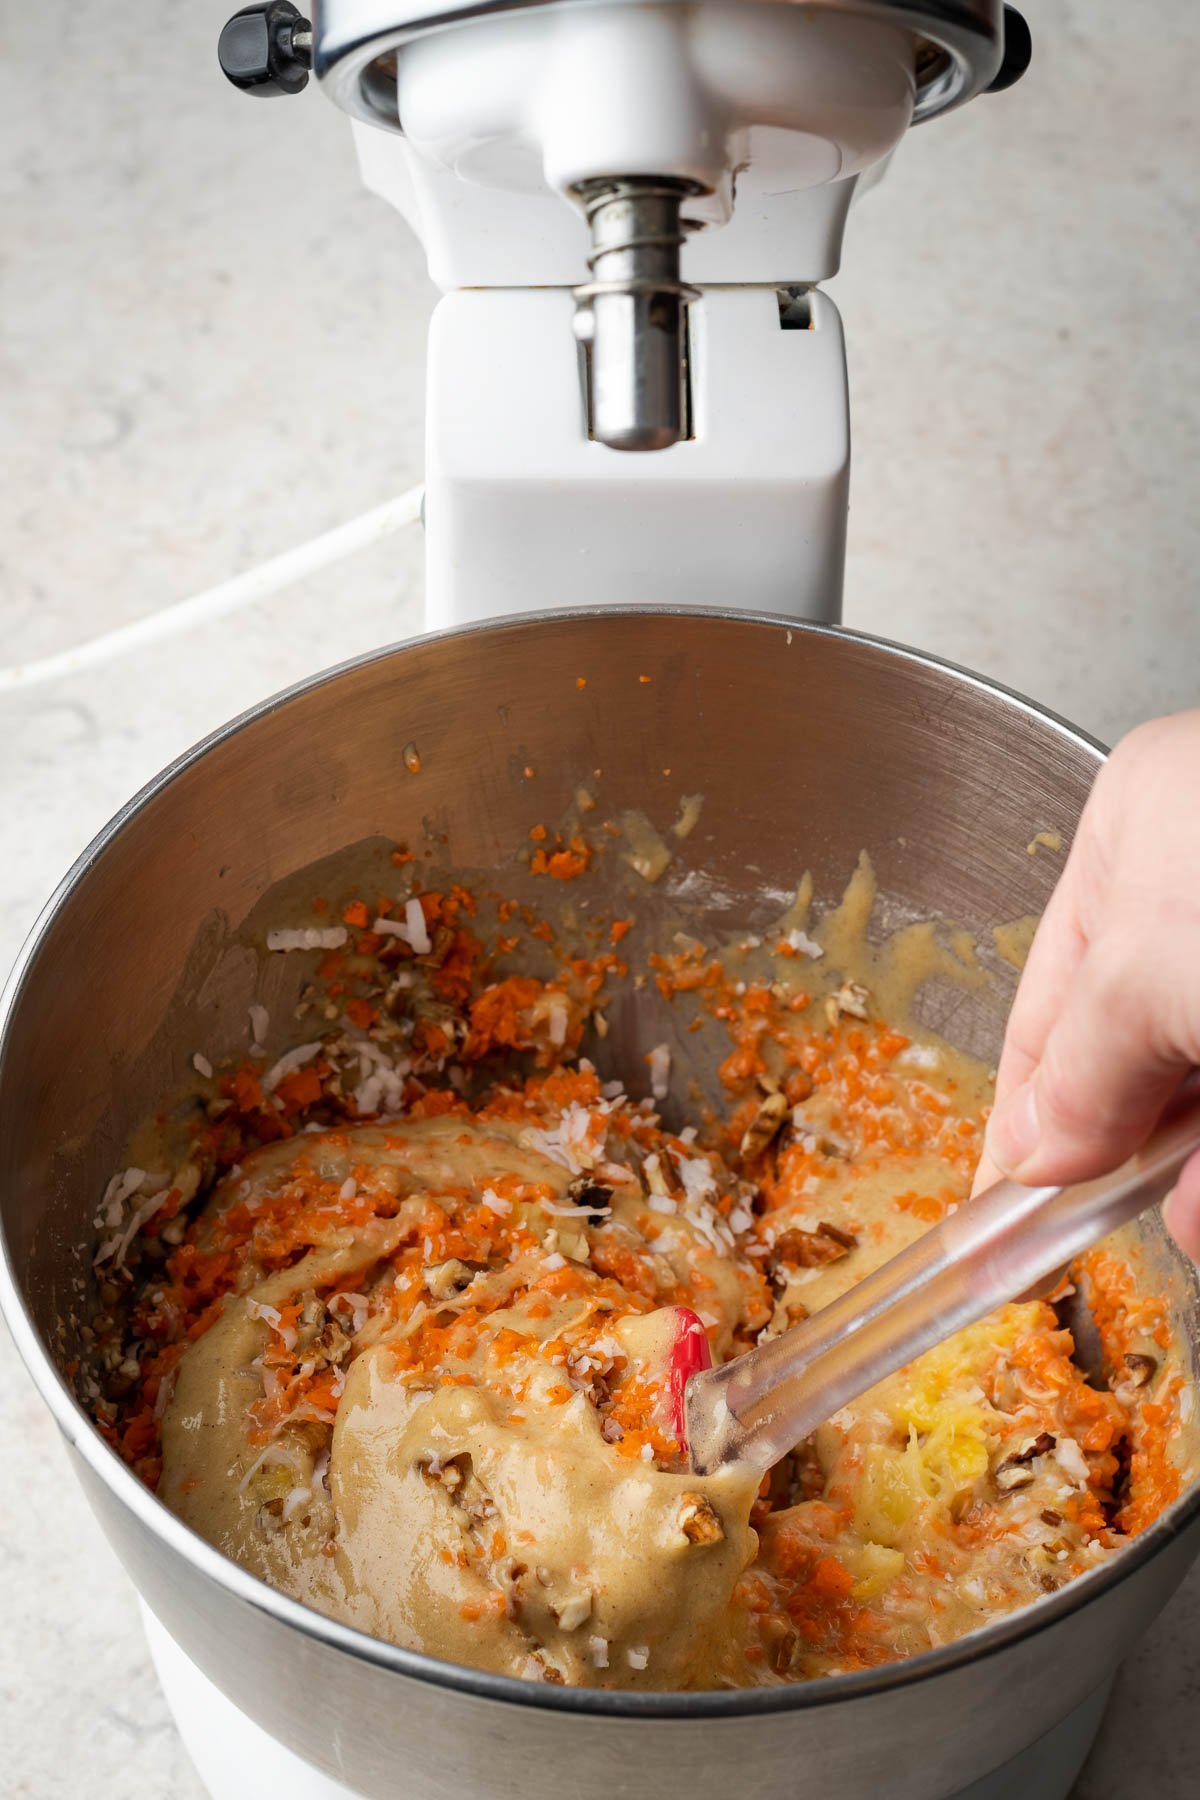 Mixing grated carrots into cake batter.